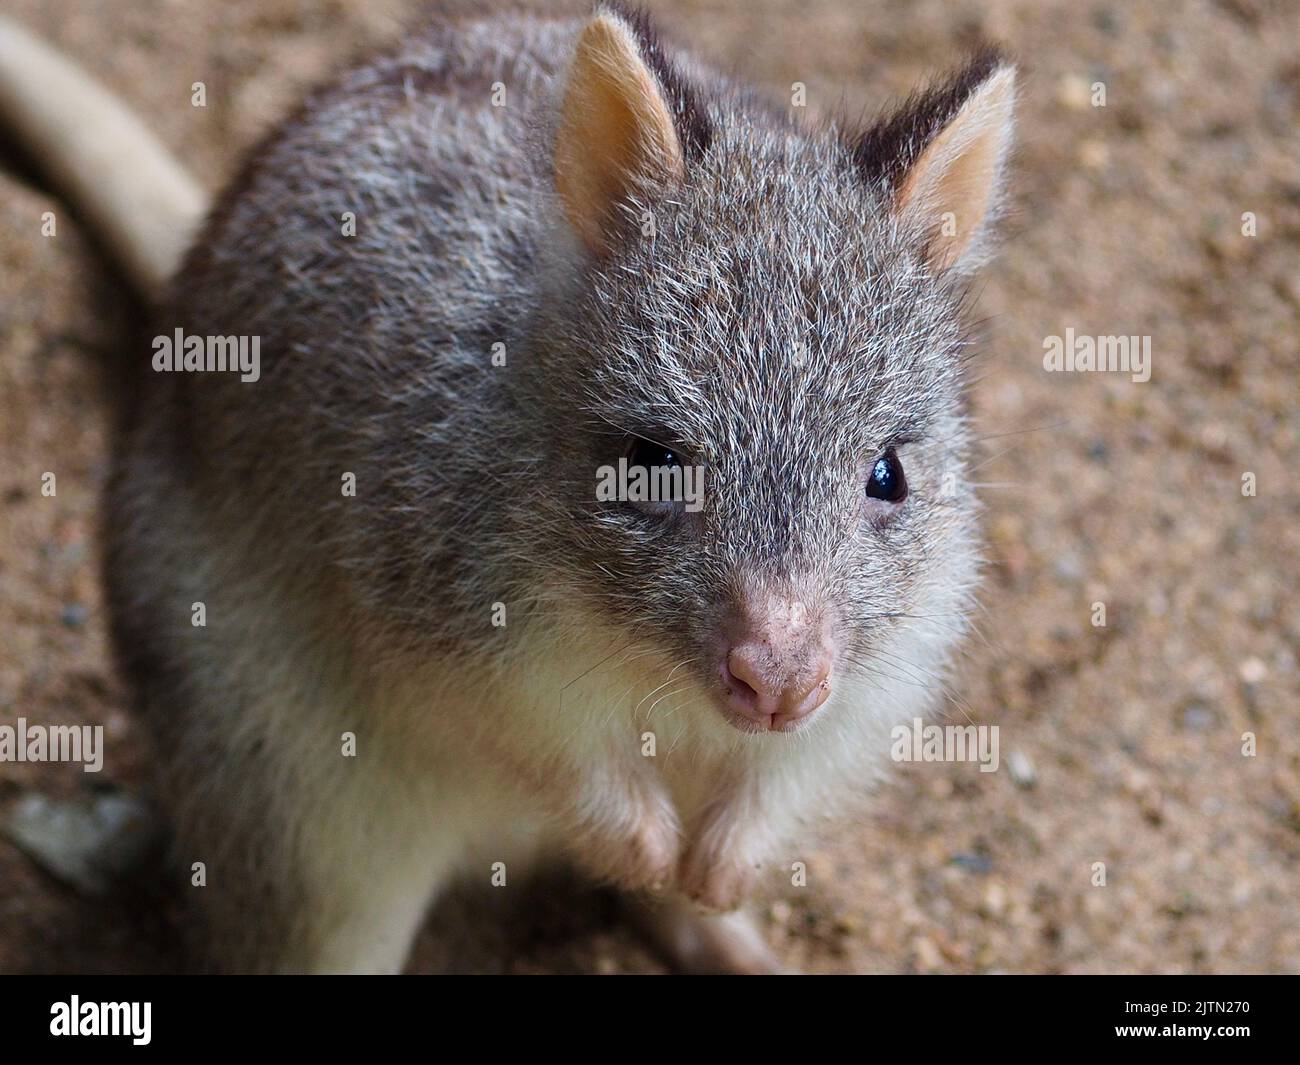 Delightful lovely Rufous Bettong with bright eyes and delicate features. Stock Photo